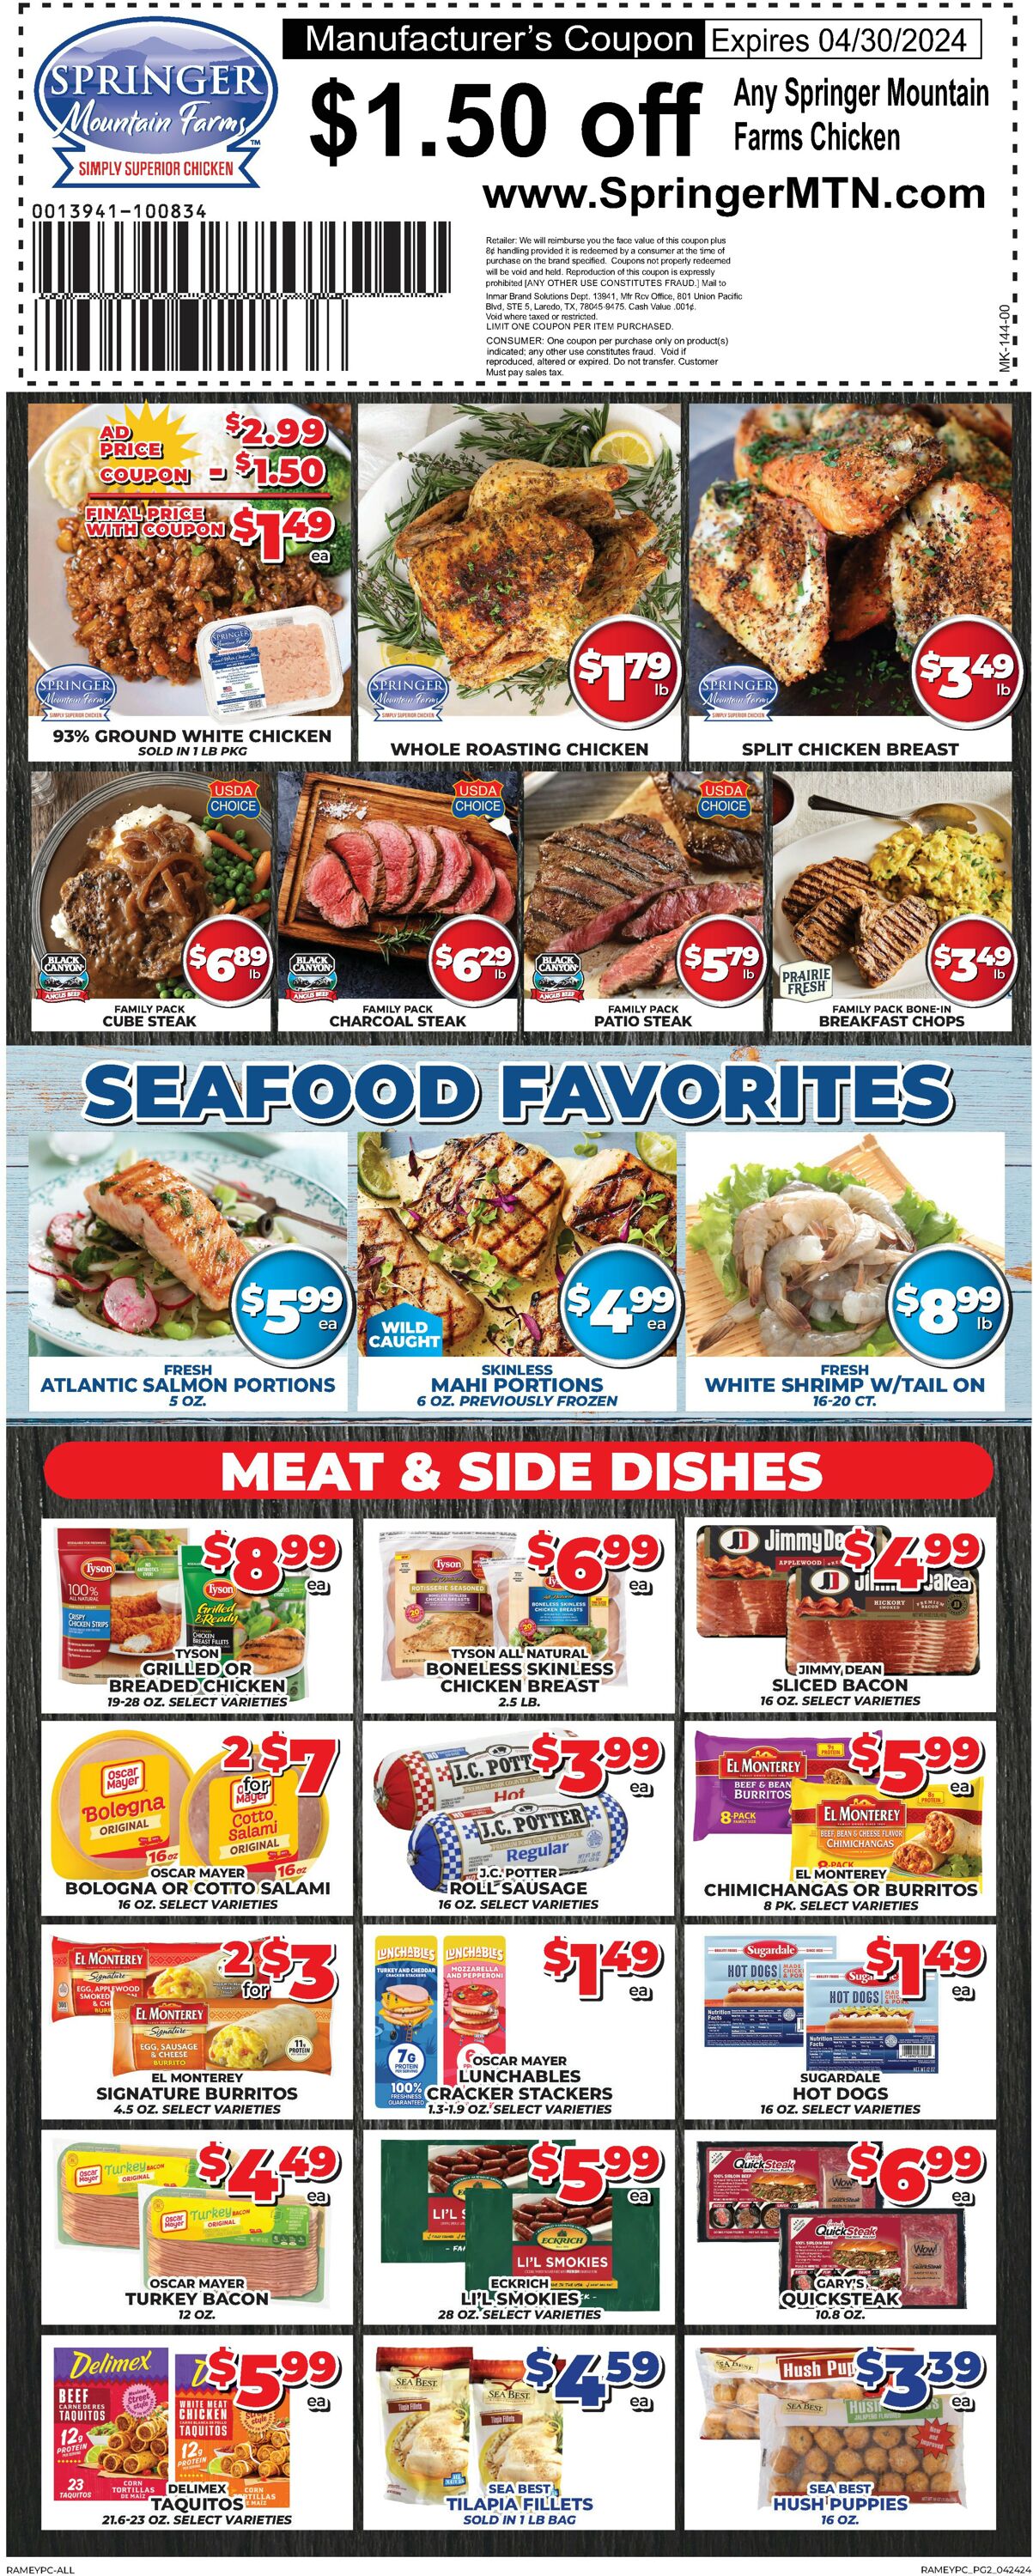 Price Cutter Weekly Ad Circular - valid 04/24-04/30/2024 (Page 2)